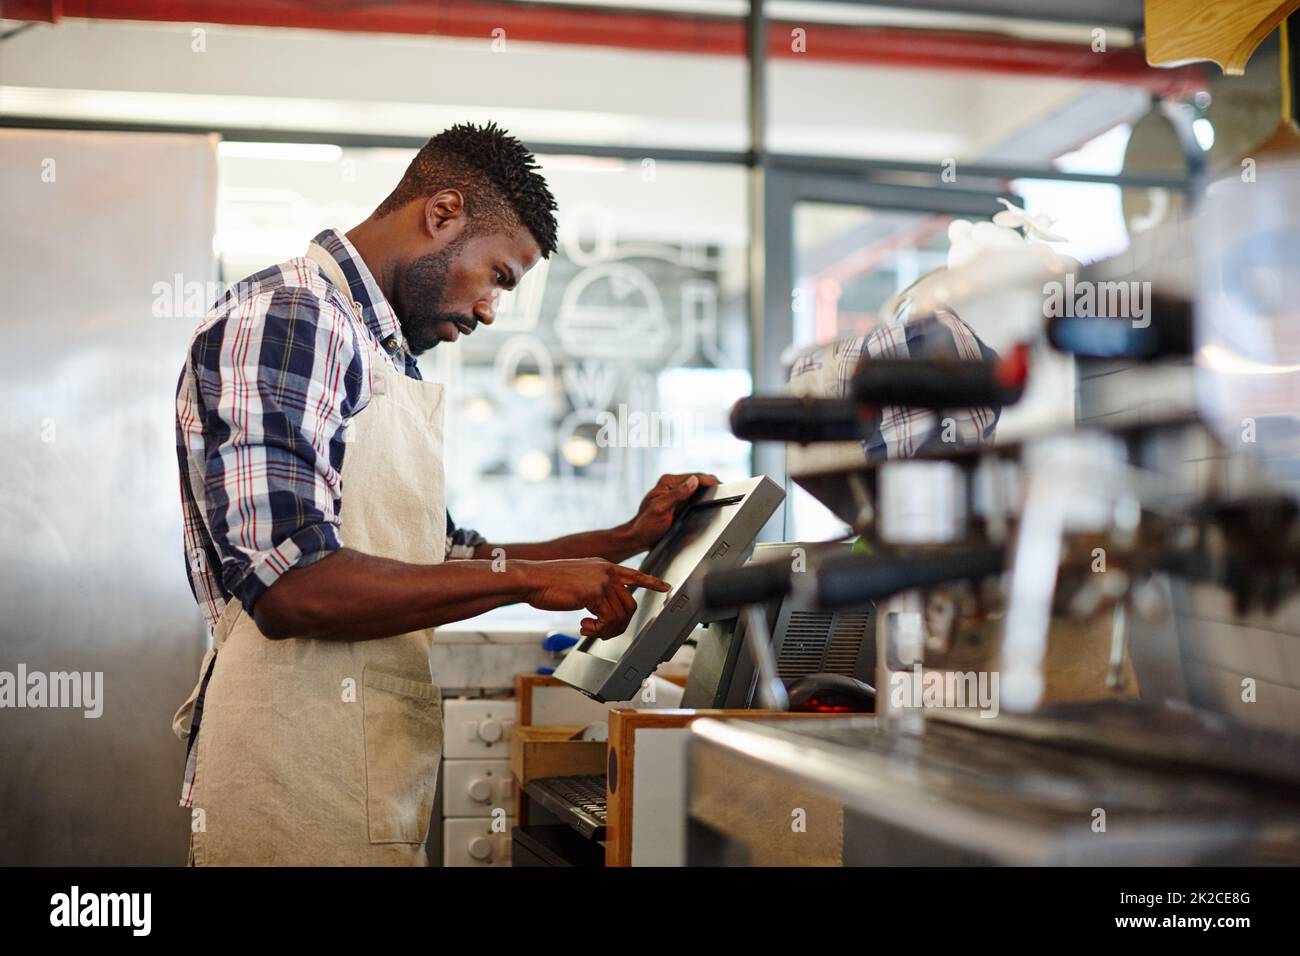 Busy day at the cafe. Cropped shot of a handsome male barista working in a coffee shop. Stock Photo